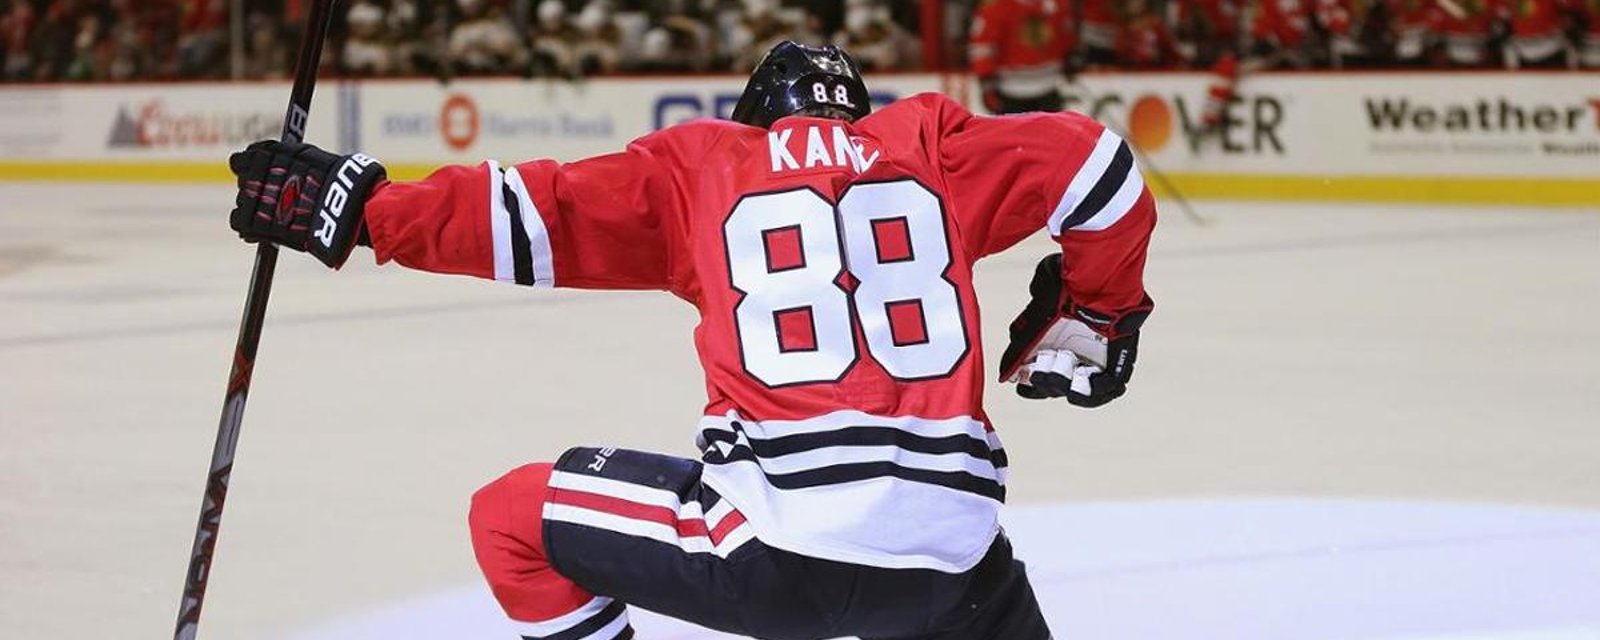 Must See: Patrick Kane has just recorded his 800th NHL point!